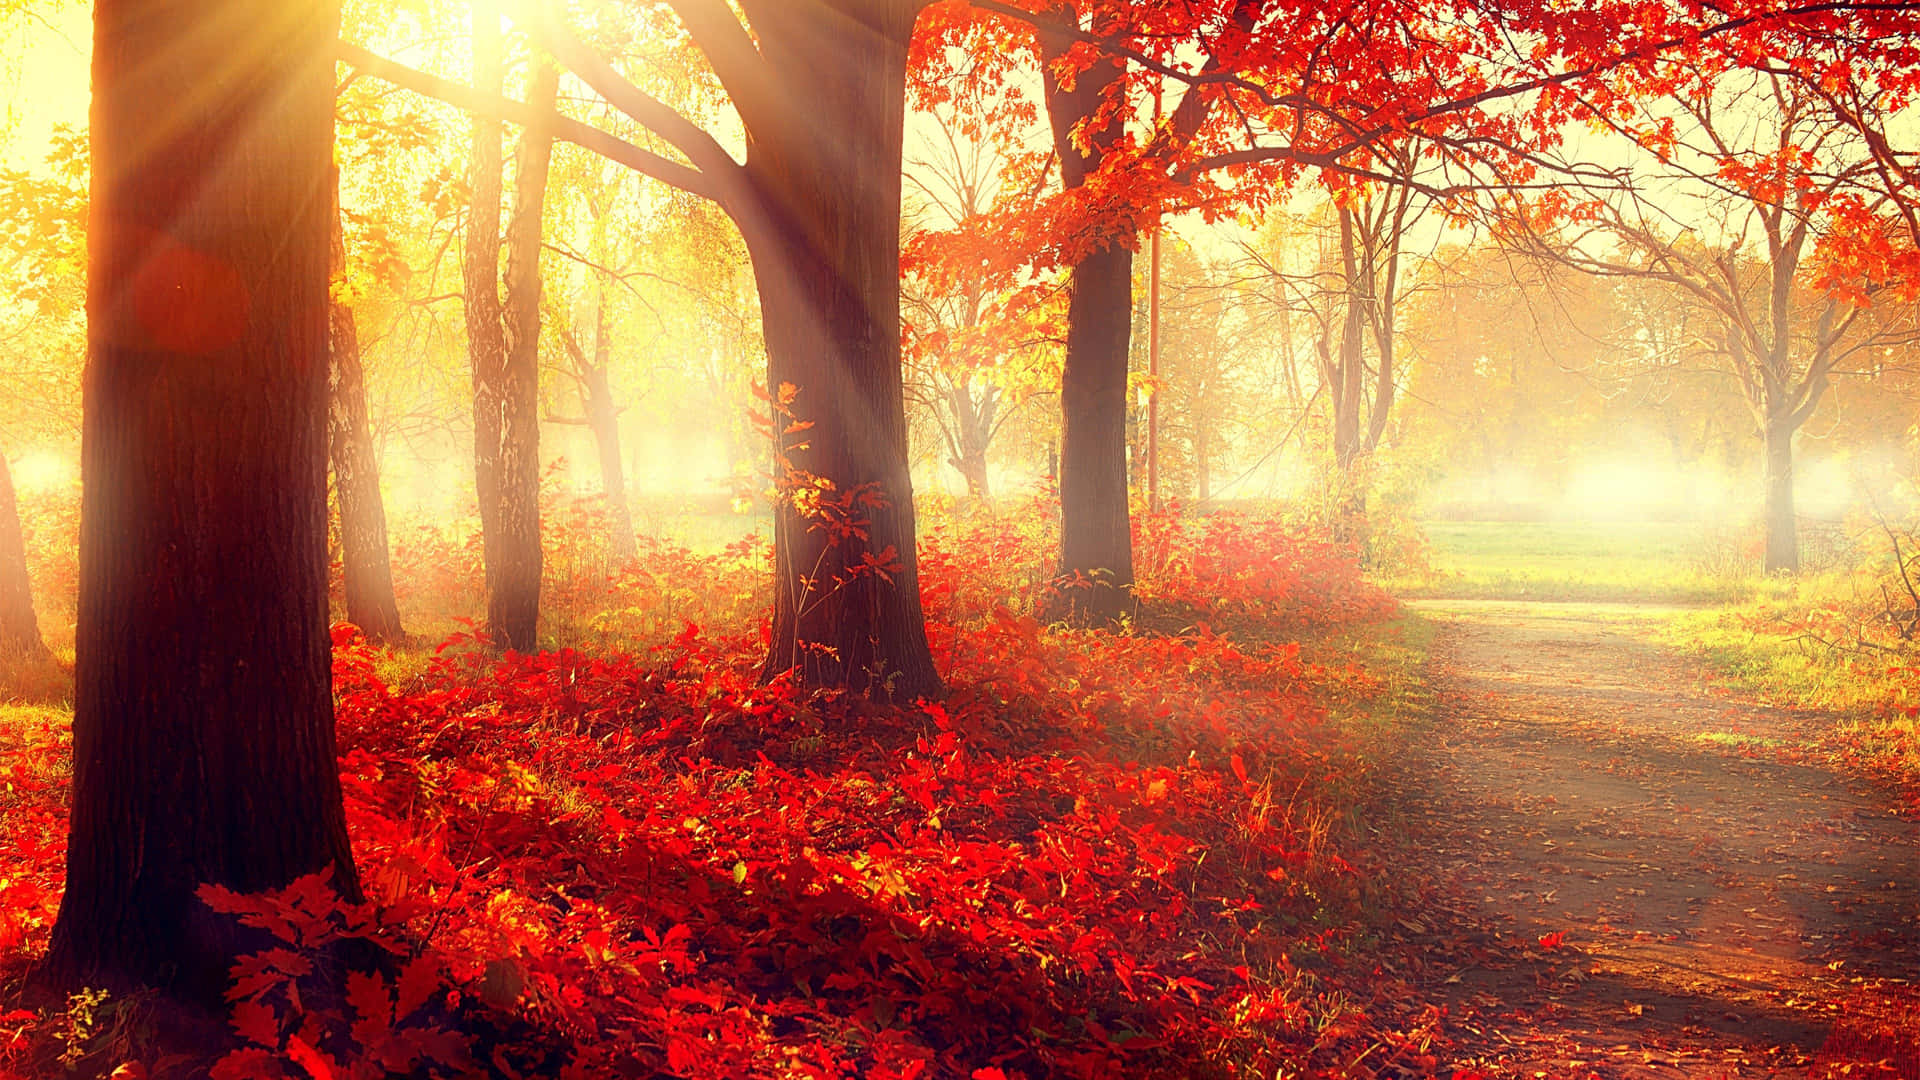 Red Maple Trees Autumn Aesthetic Wallpaper